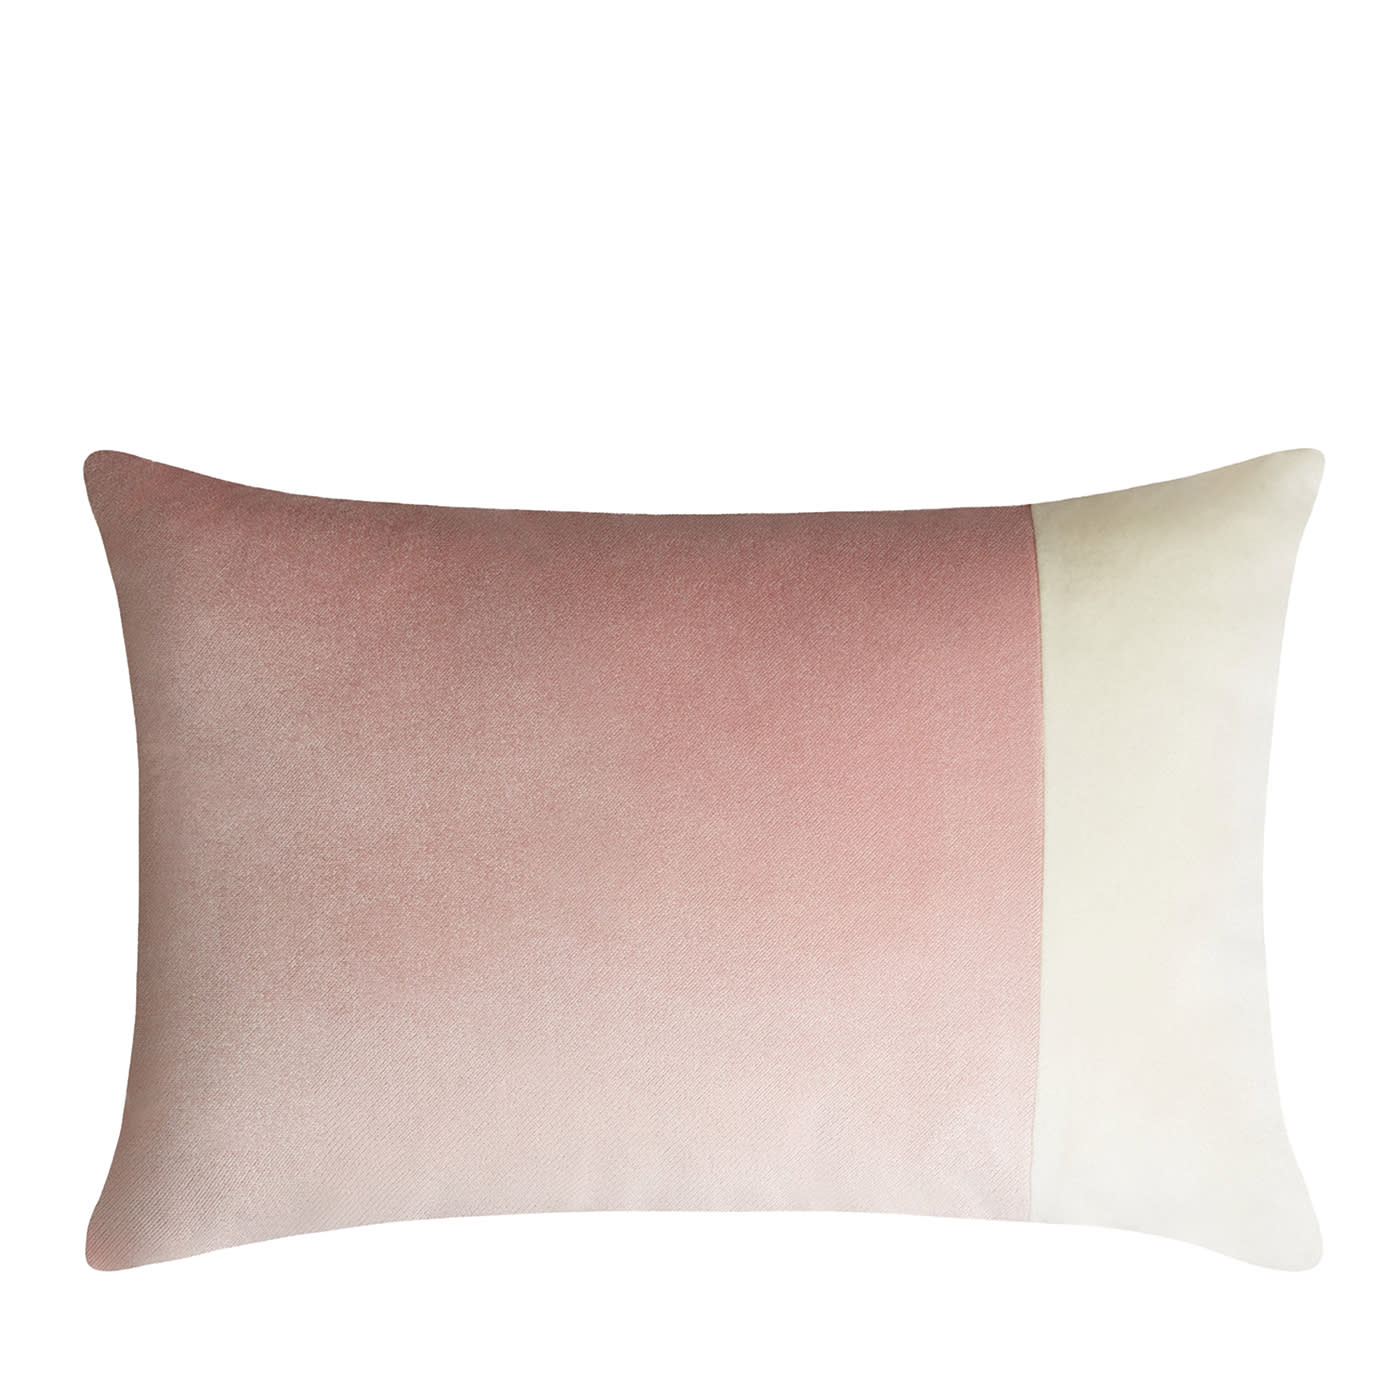 Double Pink and White Rectangular Cushion - LO Decor